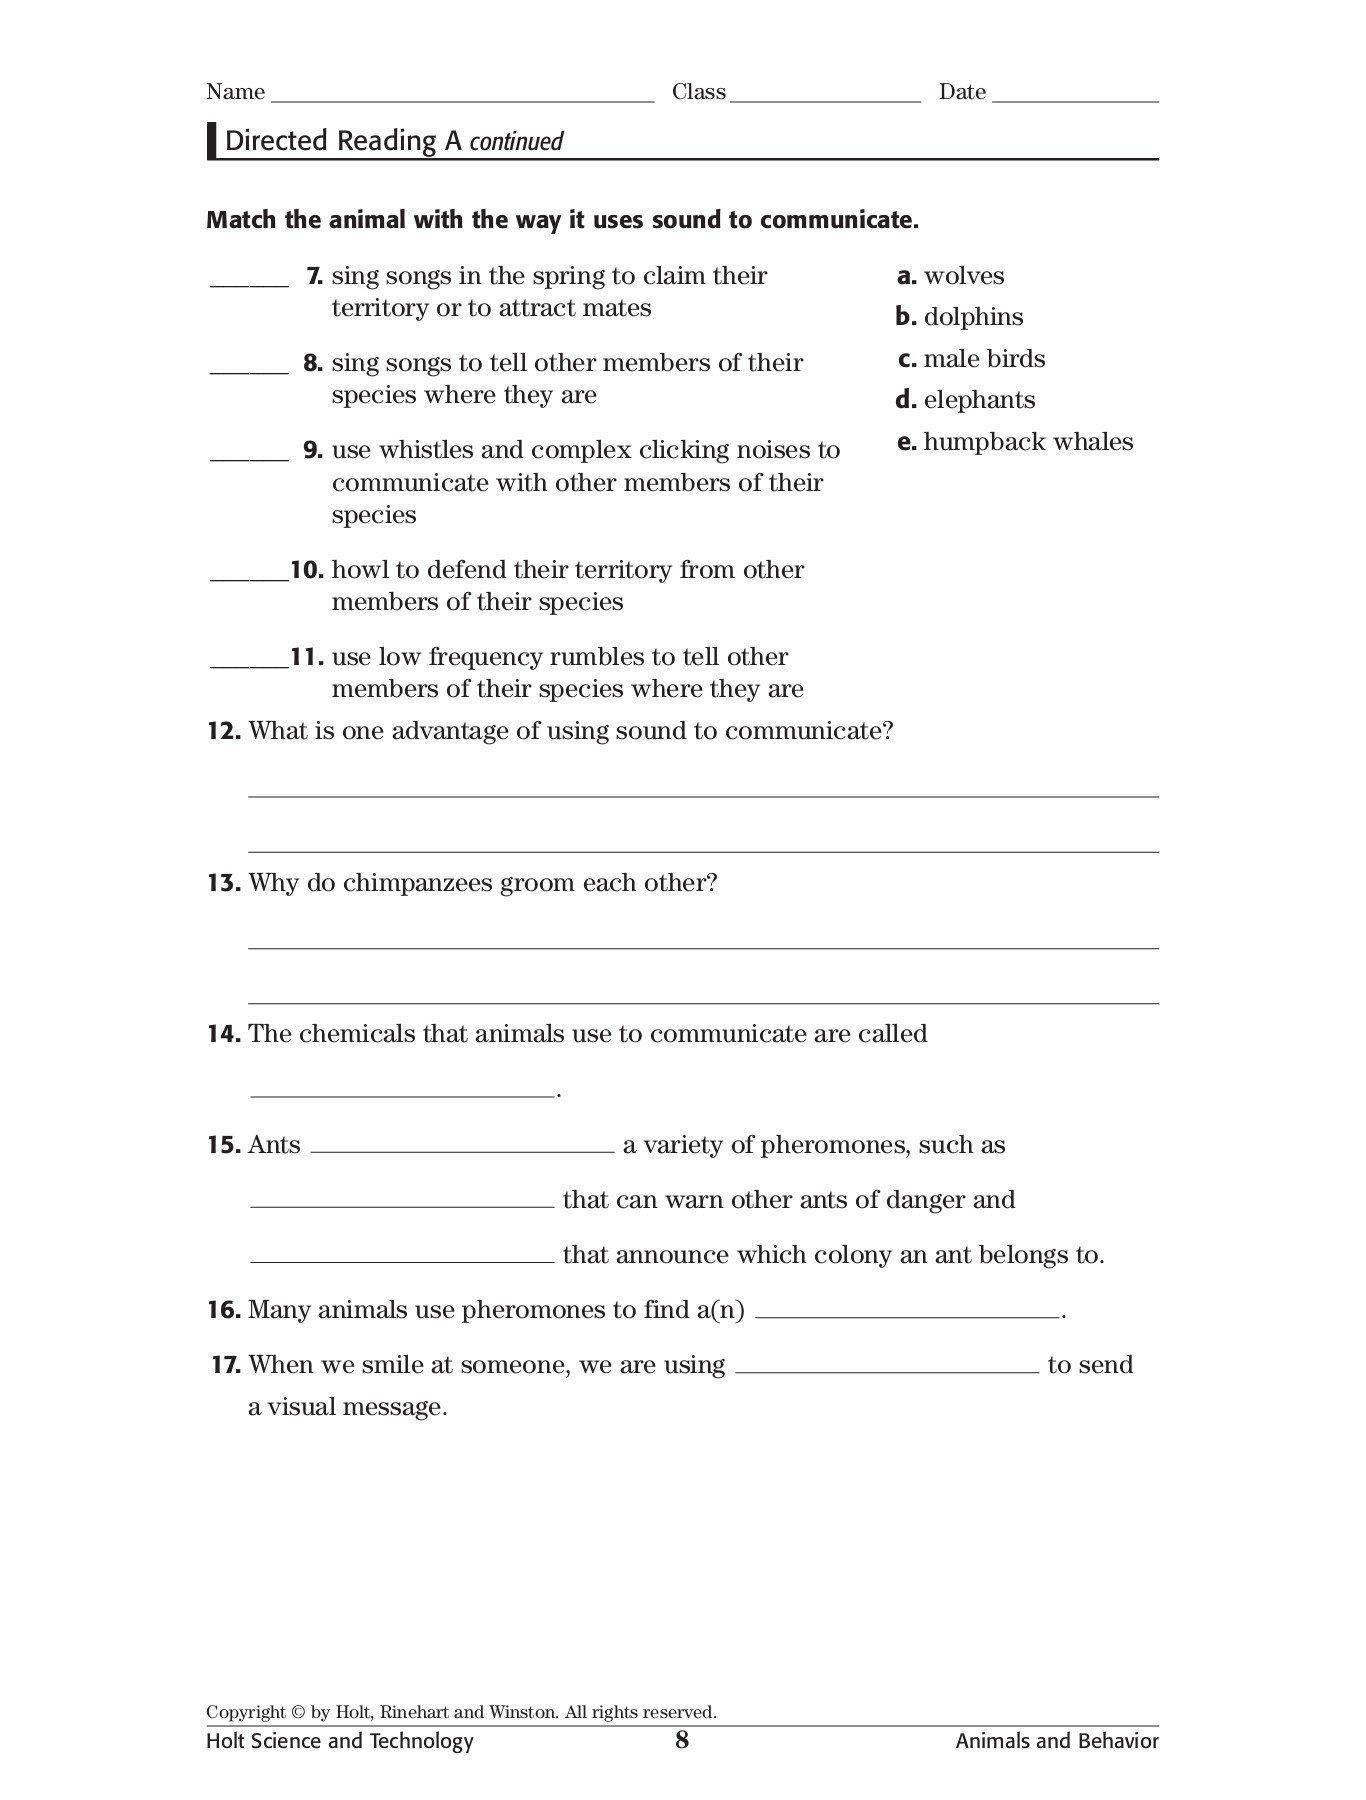 Skills Worksheet Directed Reading A  Pcmac Pages 1  3  Text Within Skills Worksheet Directed Reading